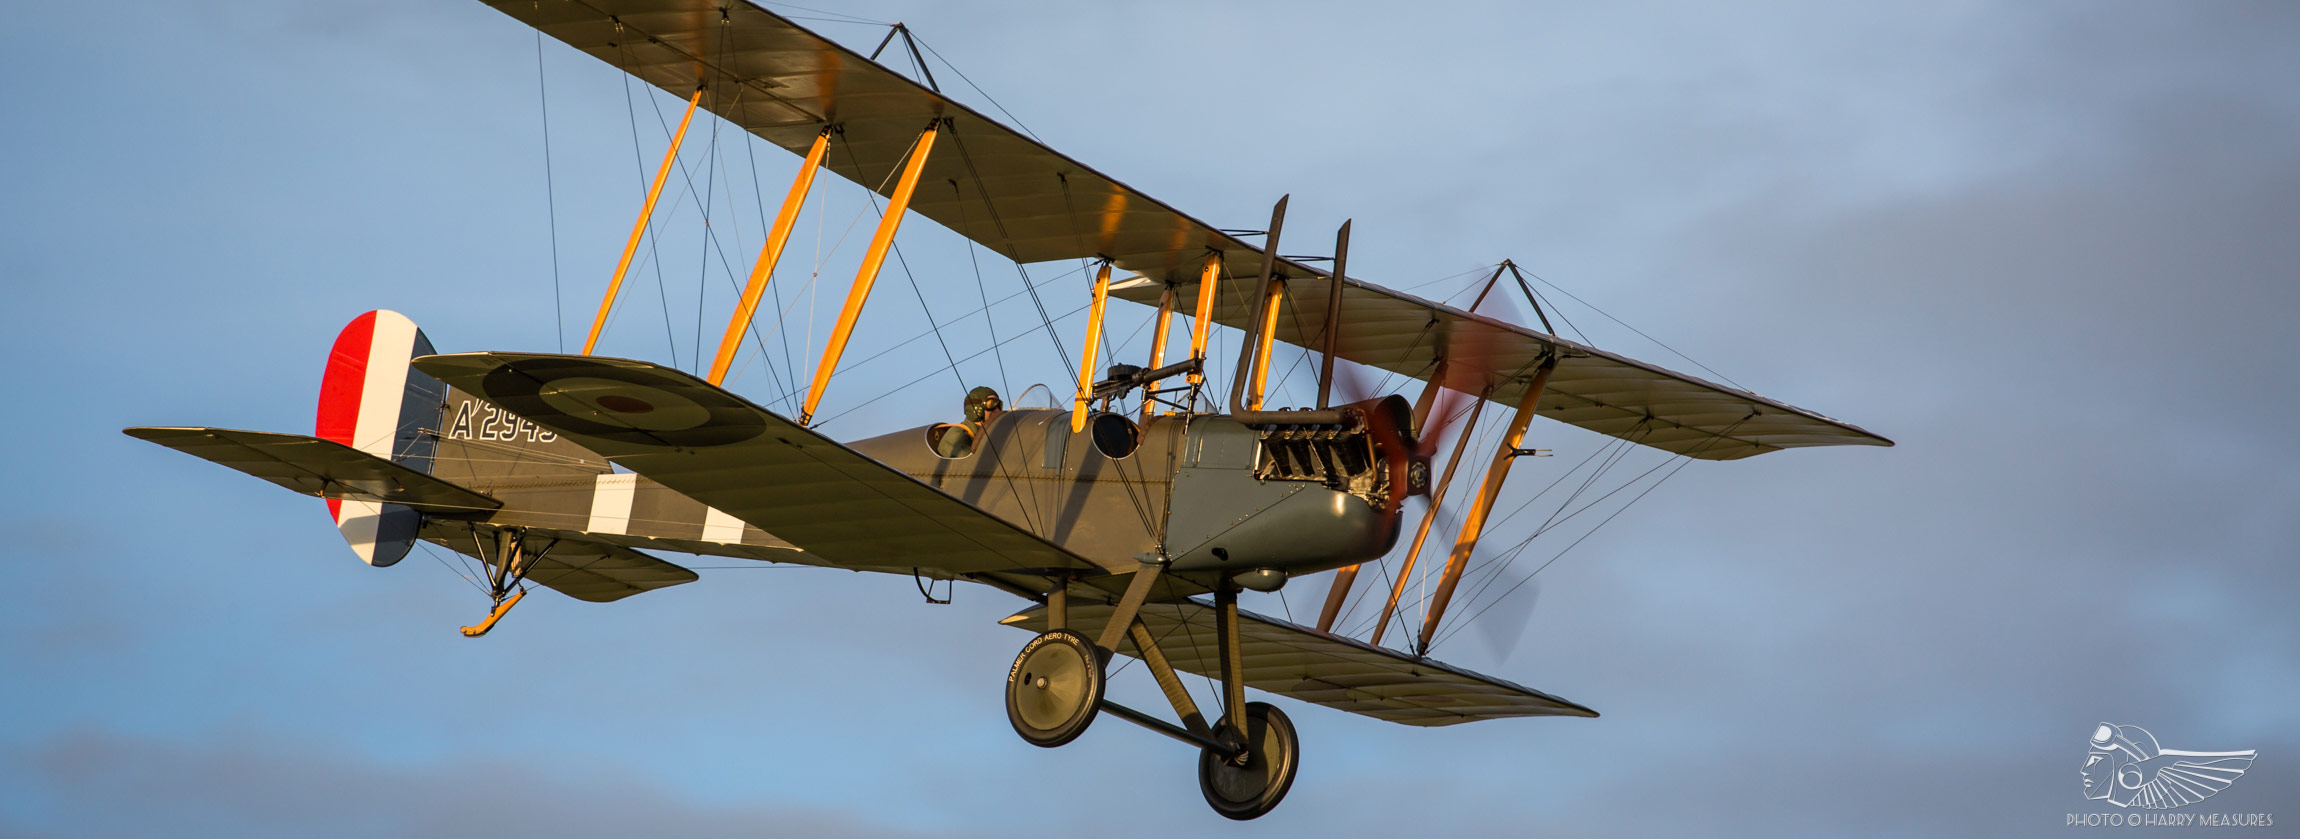 WWI Airshow comes good for Old Warden